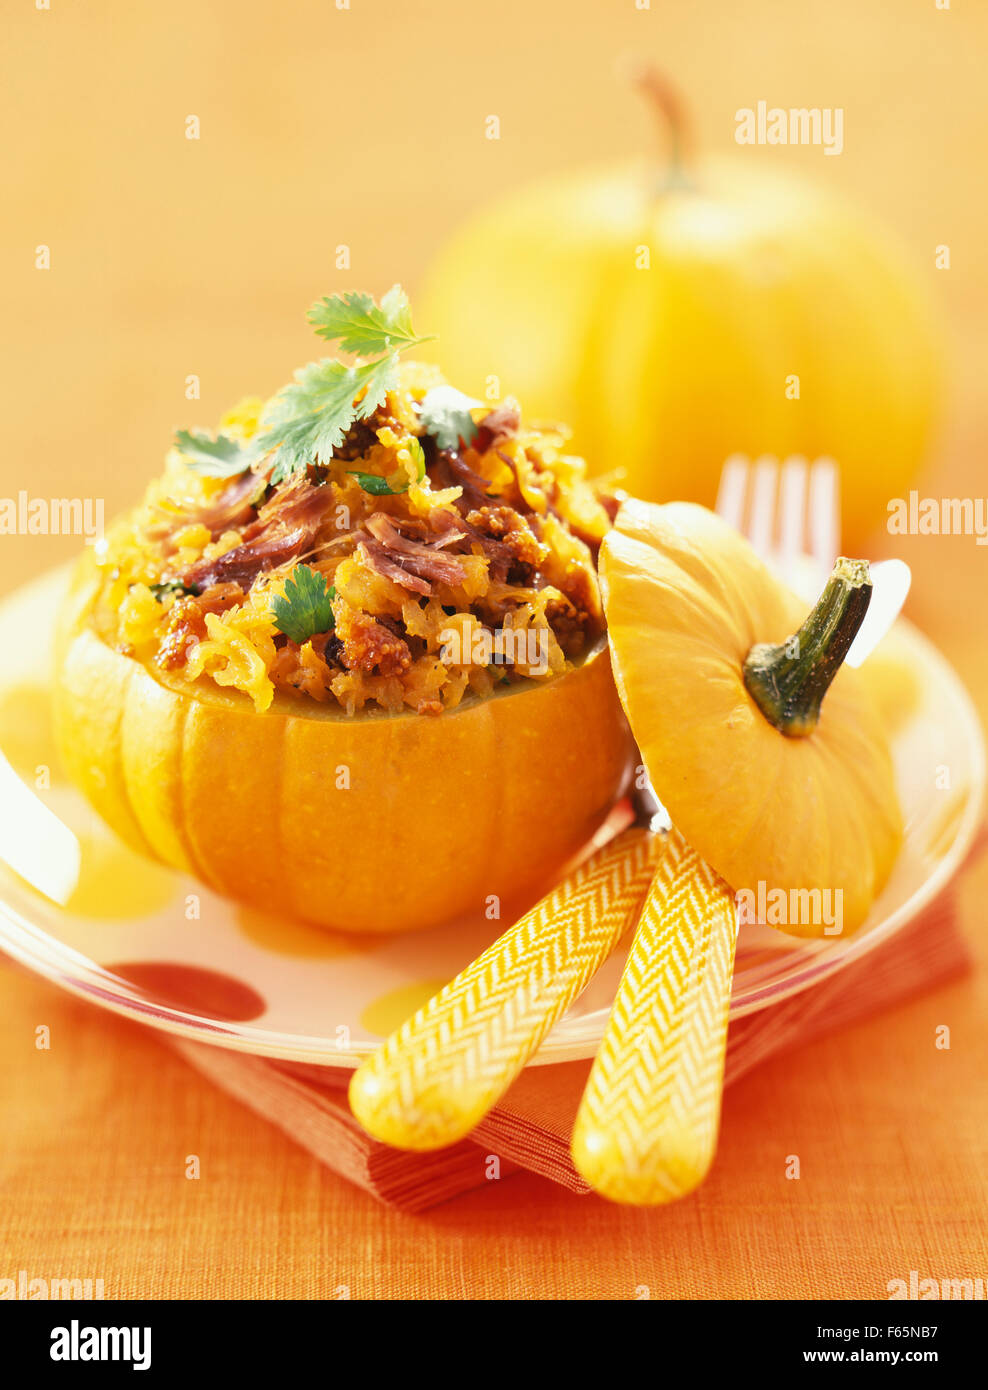 baby pumpkin stuffed with duck confit Stock Photo